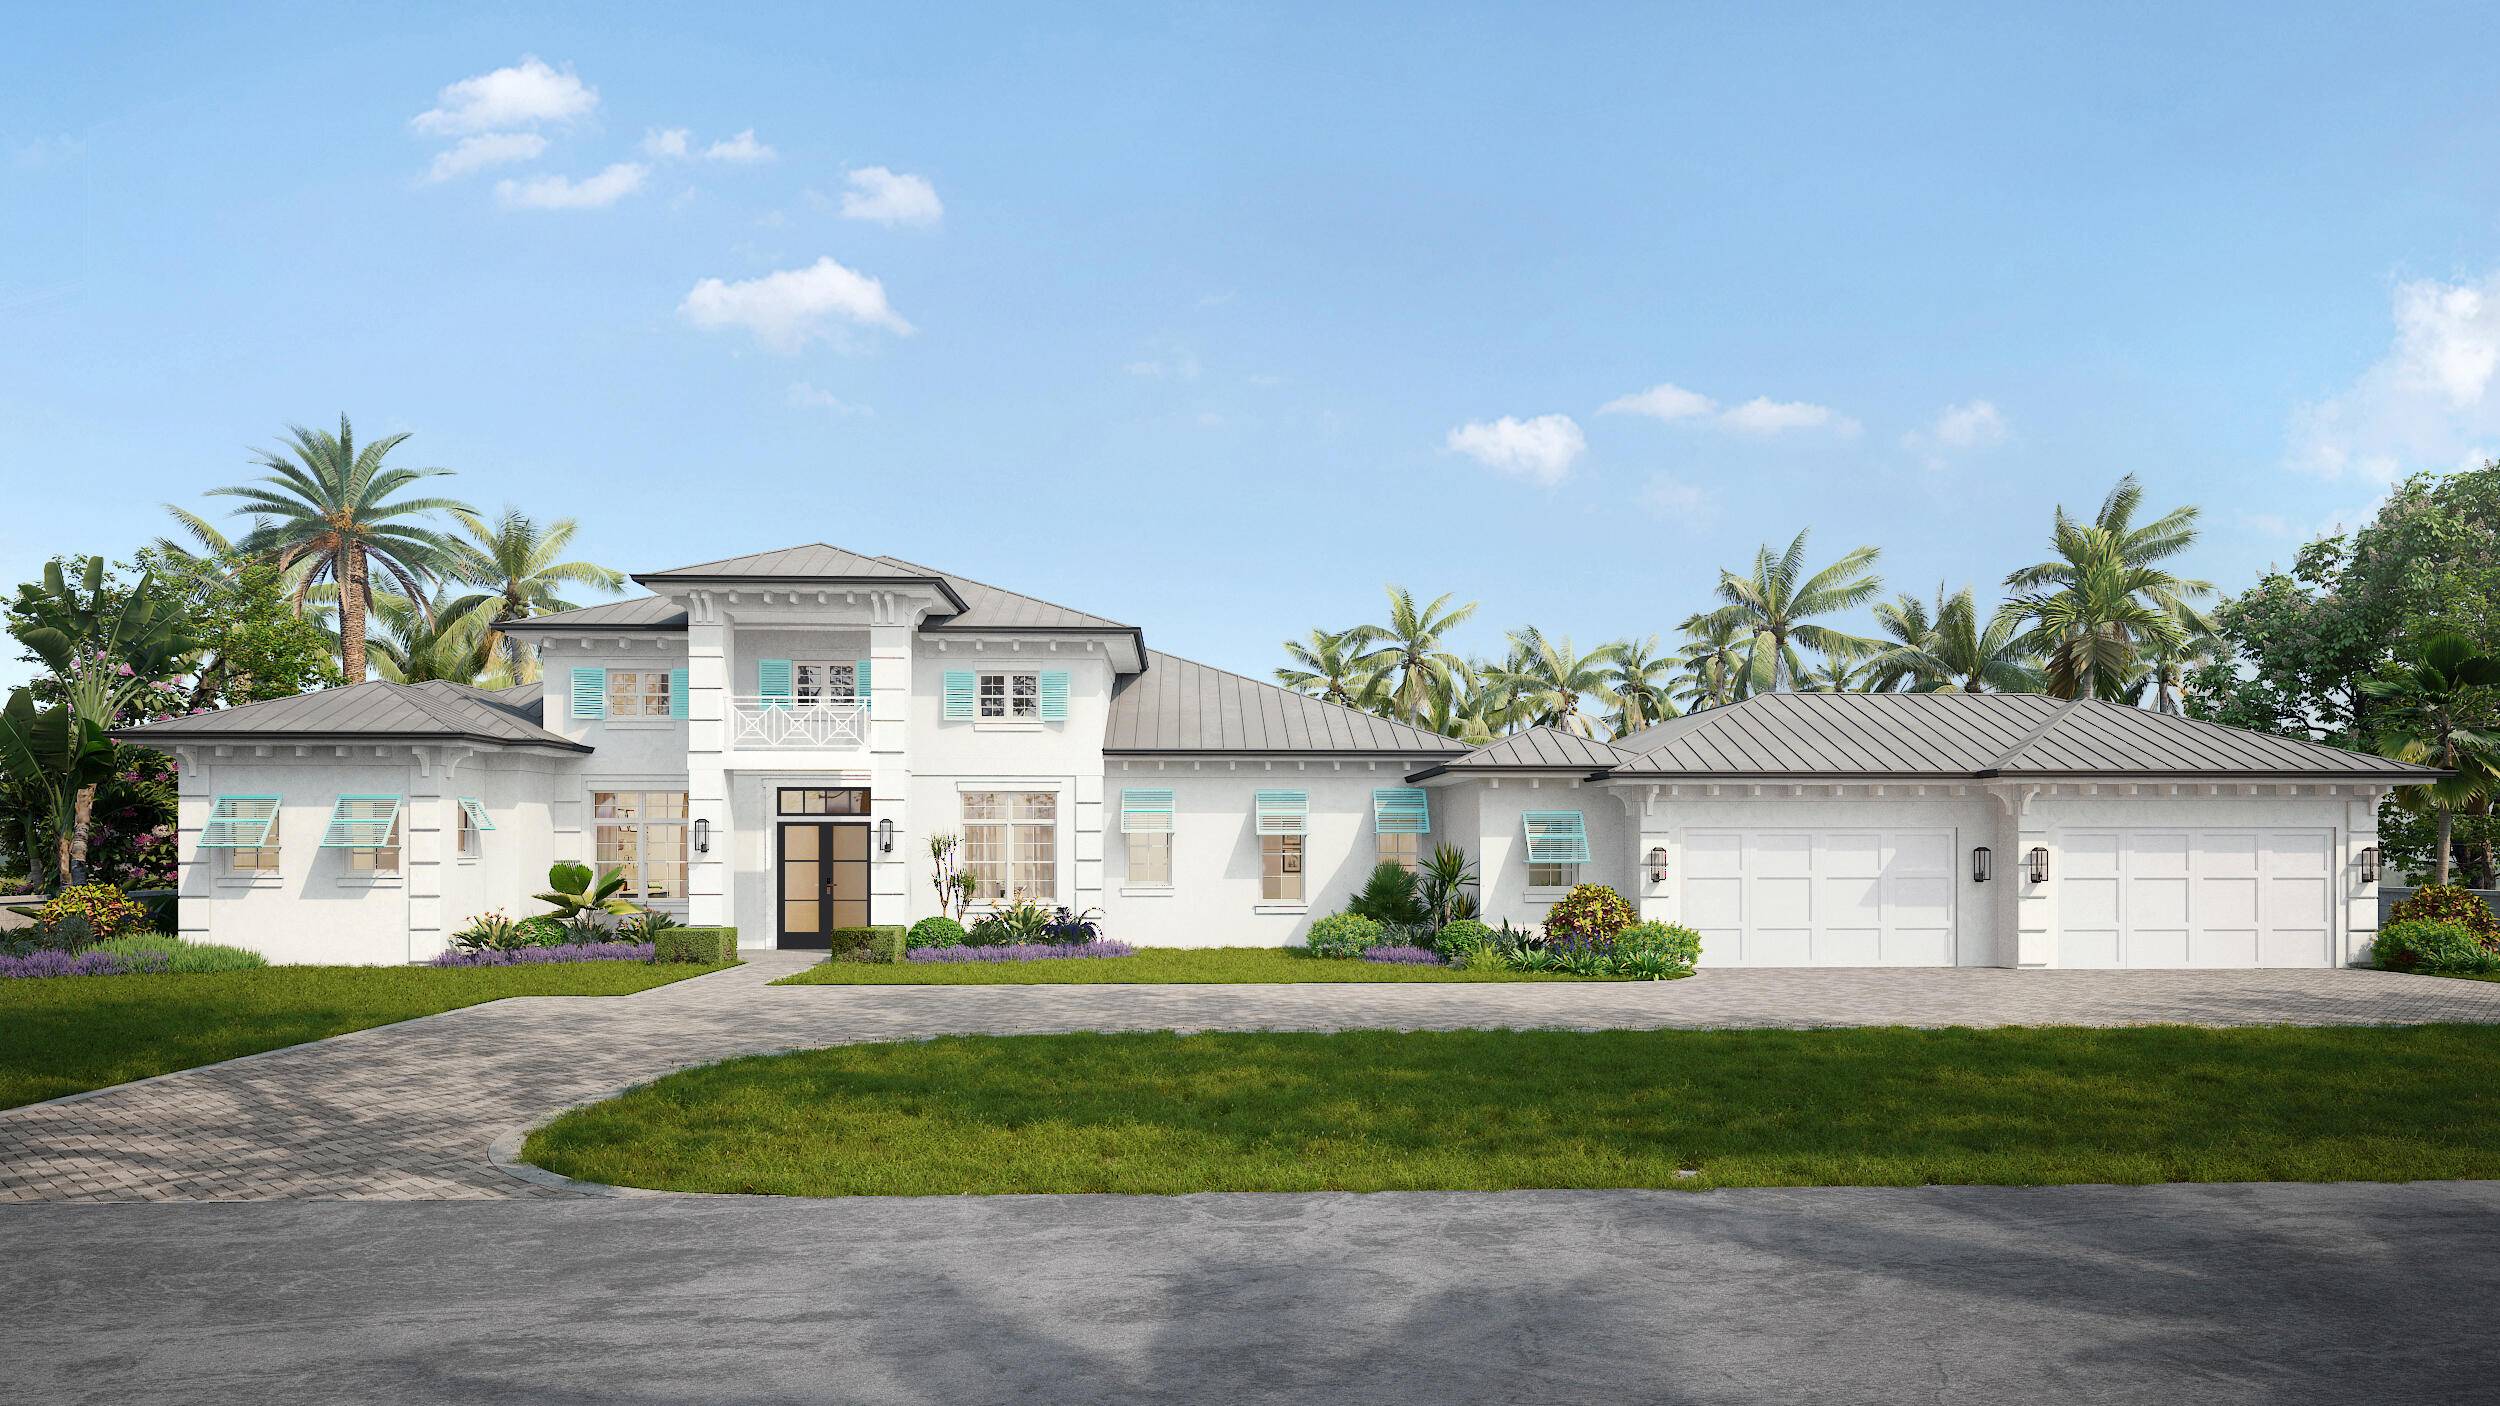 Looking for an exceptional luxury new construction opportunity on a 1 acre lot ?